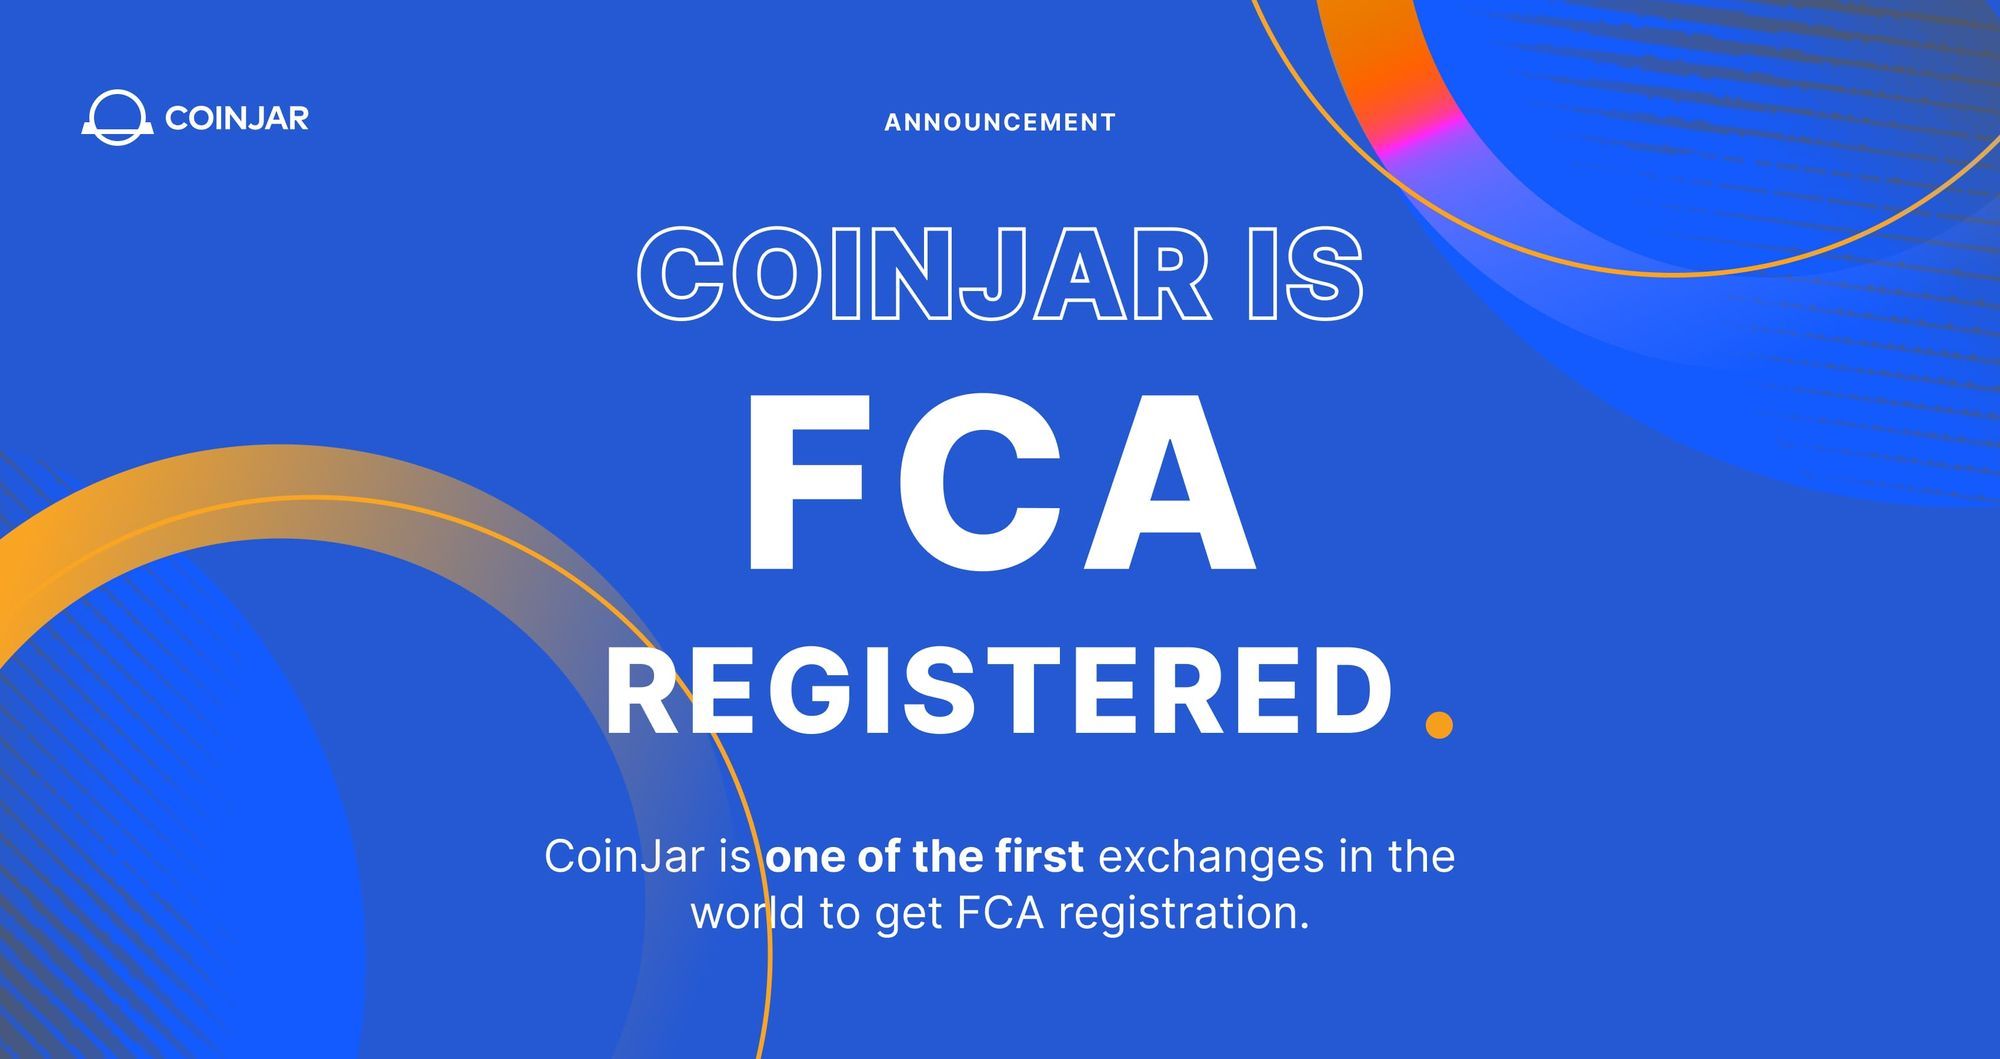 CoinJar is one of the first exchanges in the world to get FCA registration